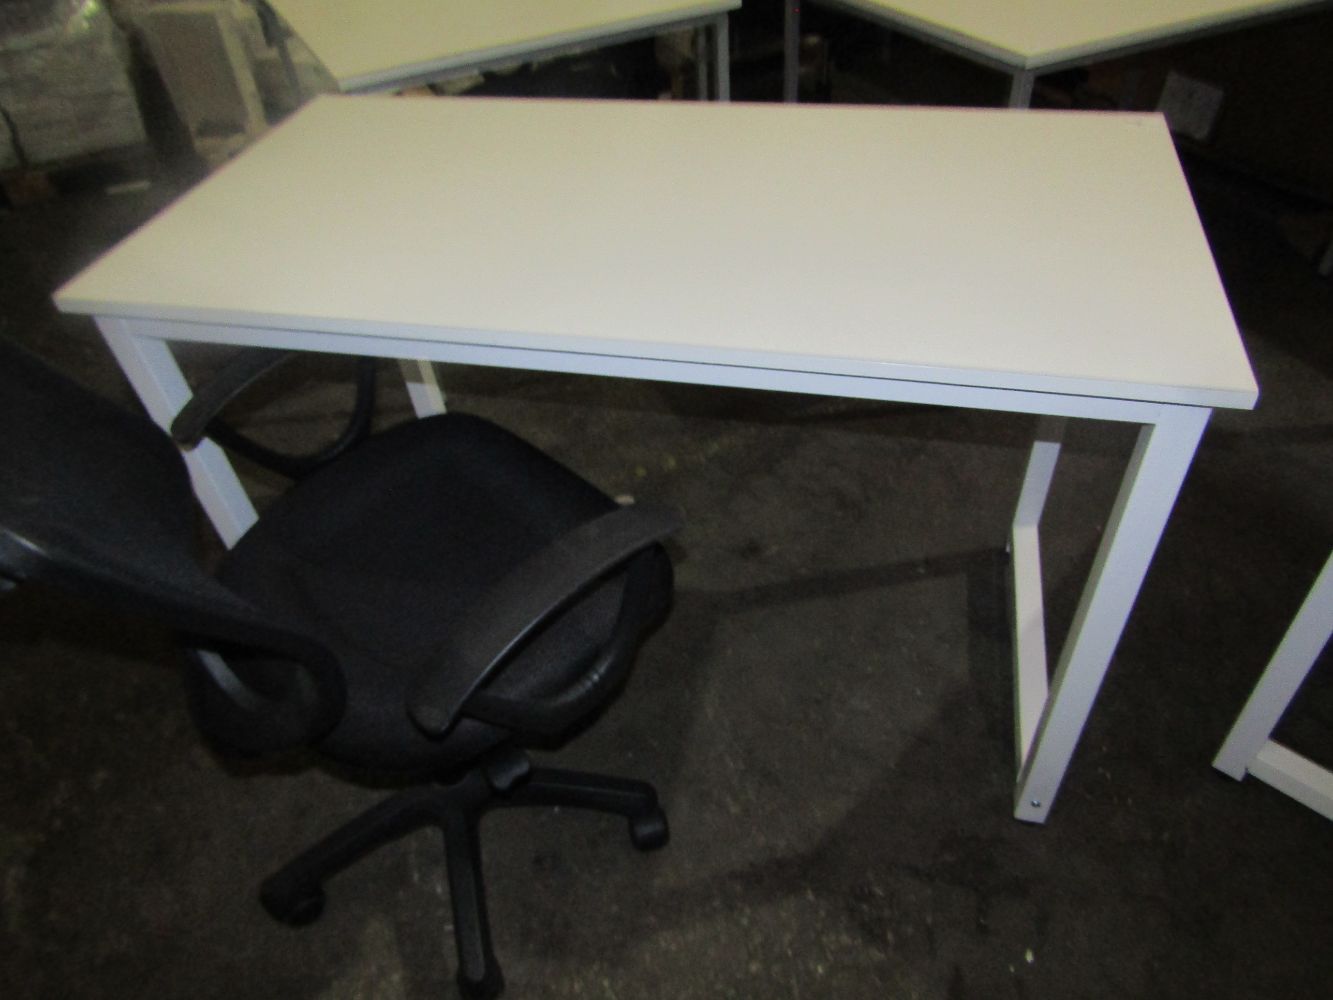 Office table and ergonomic chair sets from £20 start!!!